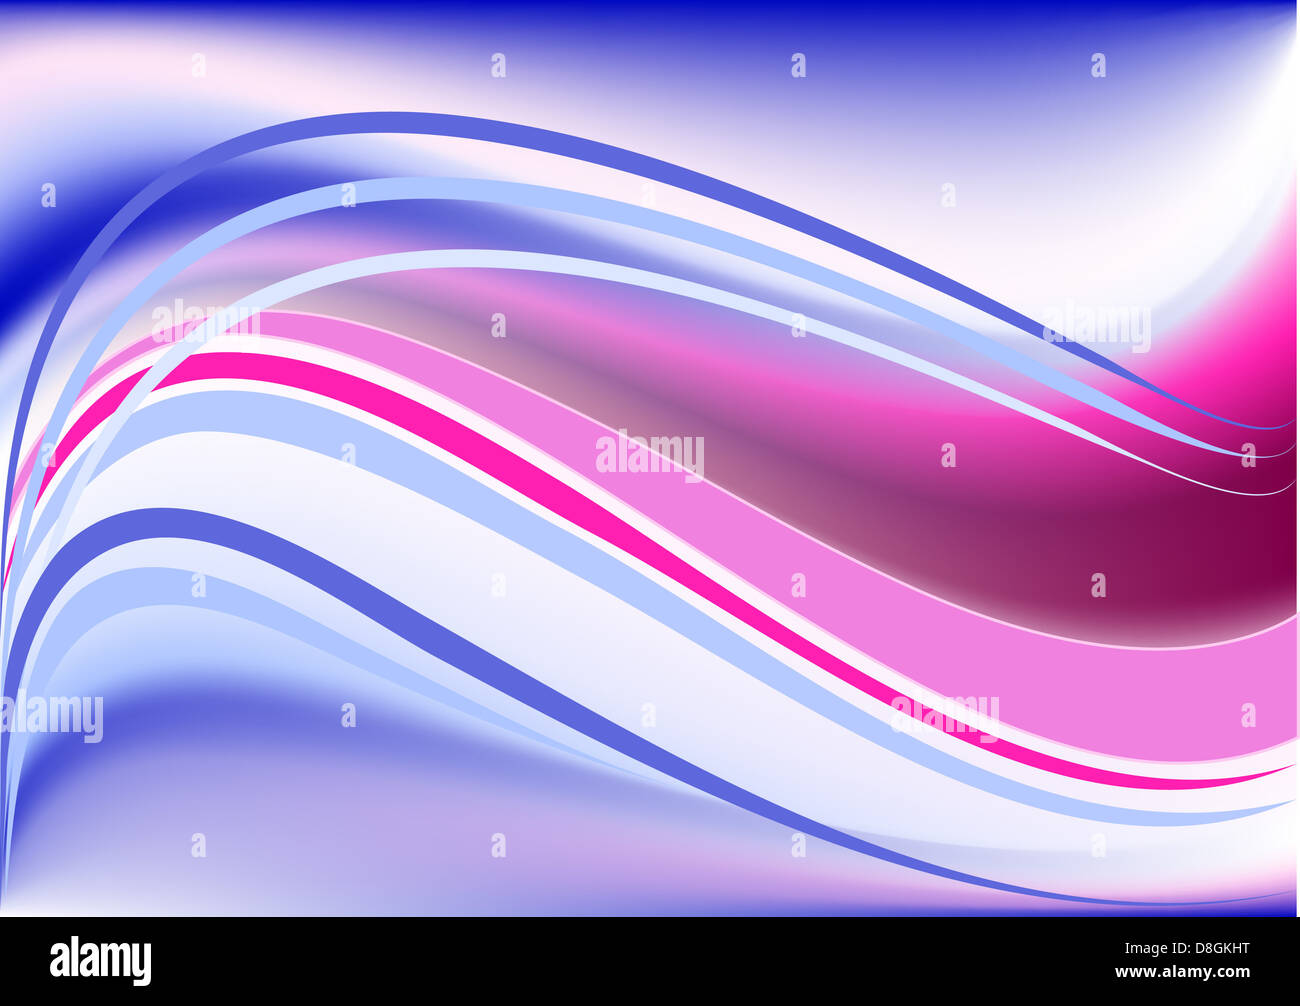 Colored waves on a light background Stock Photo